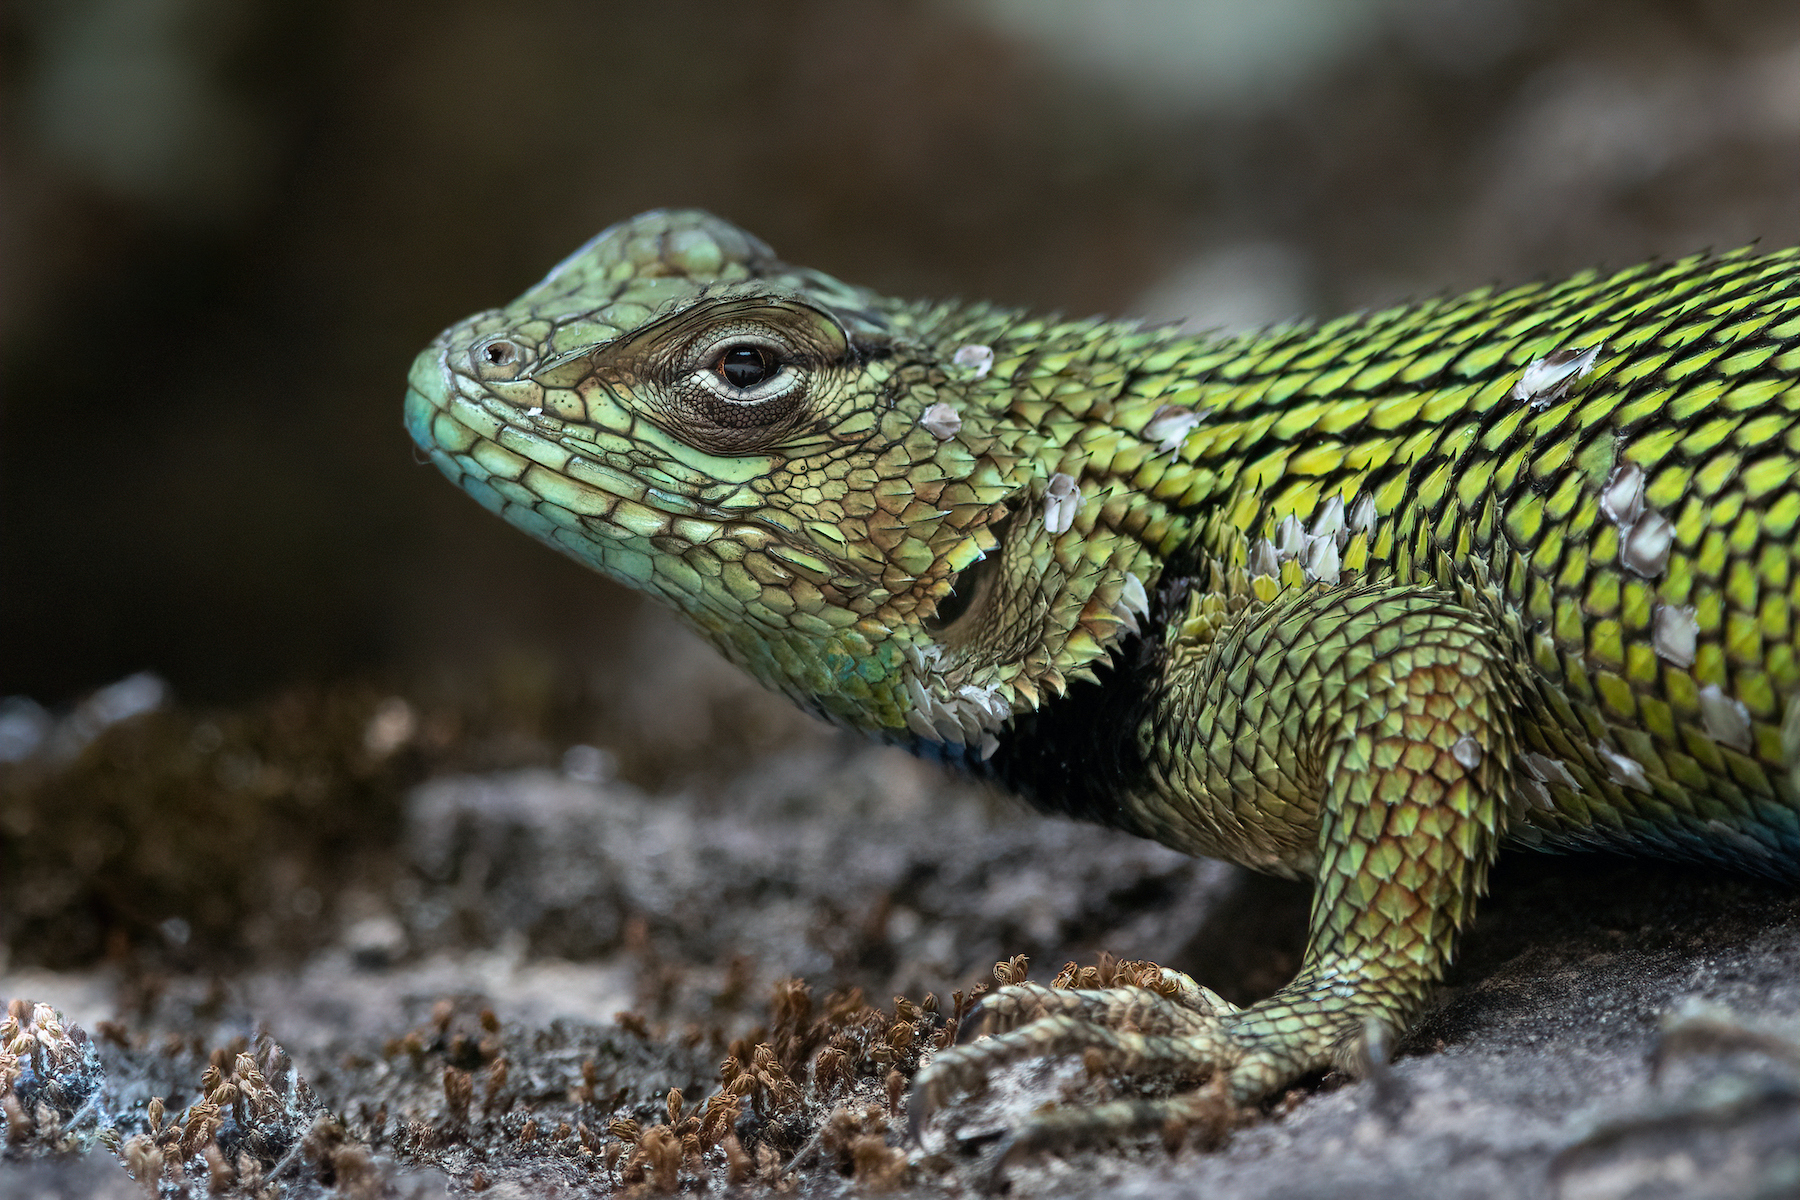 Green Spiny Lizard is another of Costa Rica's forest dragons on our wildlife photography tour